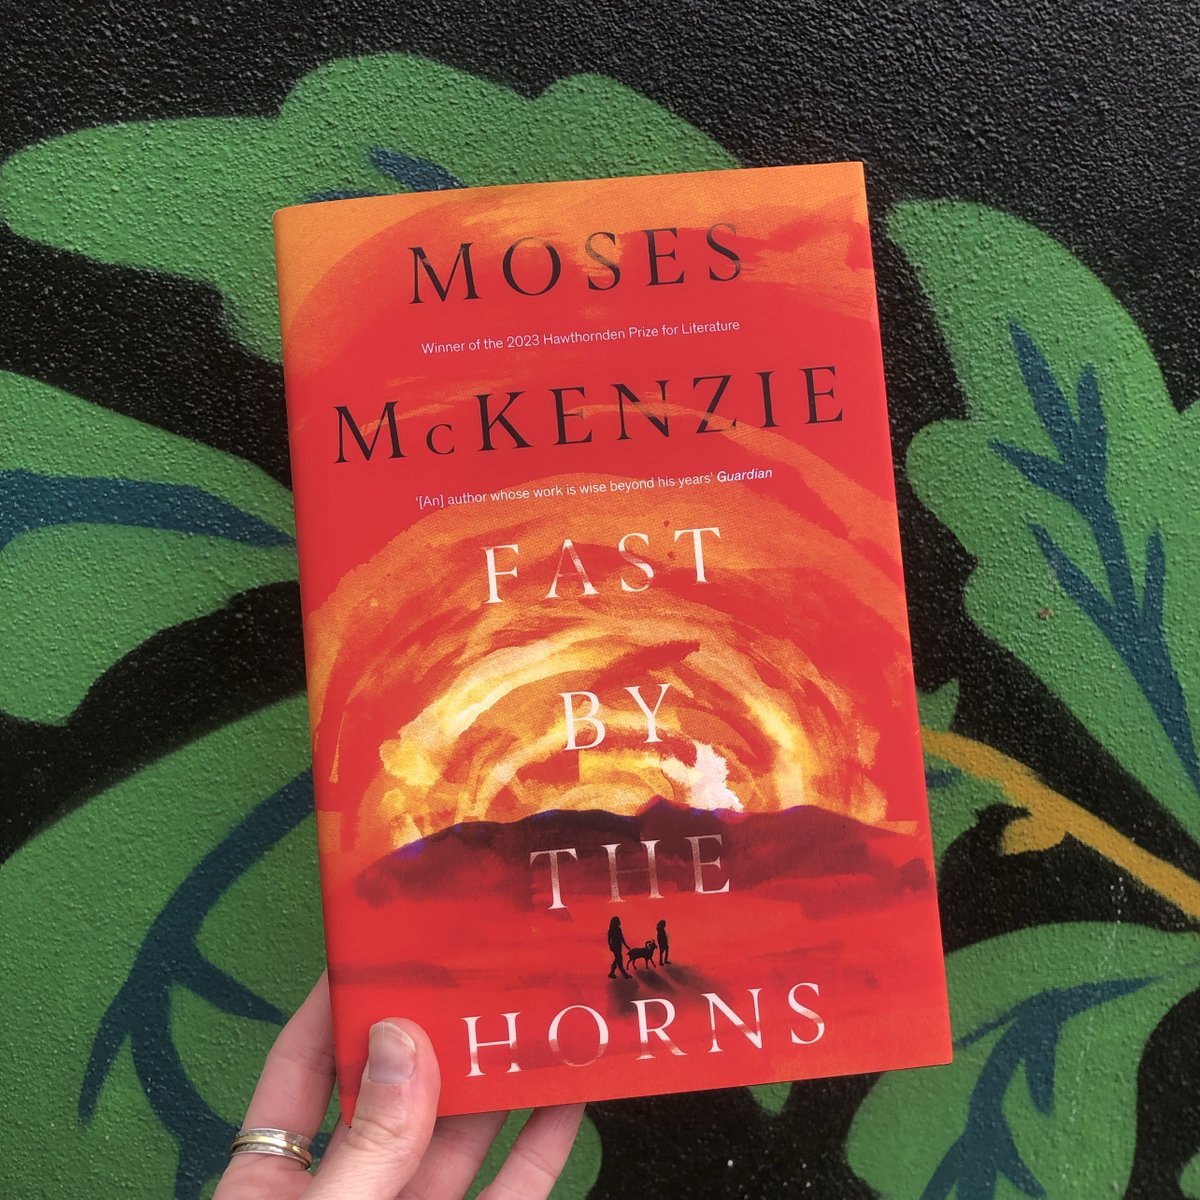 FAST BY THE HORNS is out in the world today. Happy pub day @eastsidemoses! From the Hawthornden Prize-winning author of AN OLIVE GROVE IN ENDS, comes a powerful story of broken dreams and divided loyalties. Order your copy - geni.us/fastbythehorns